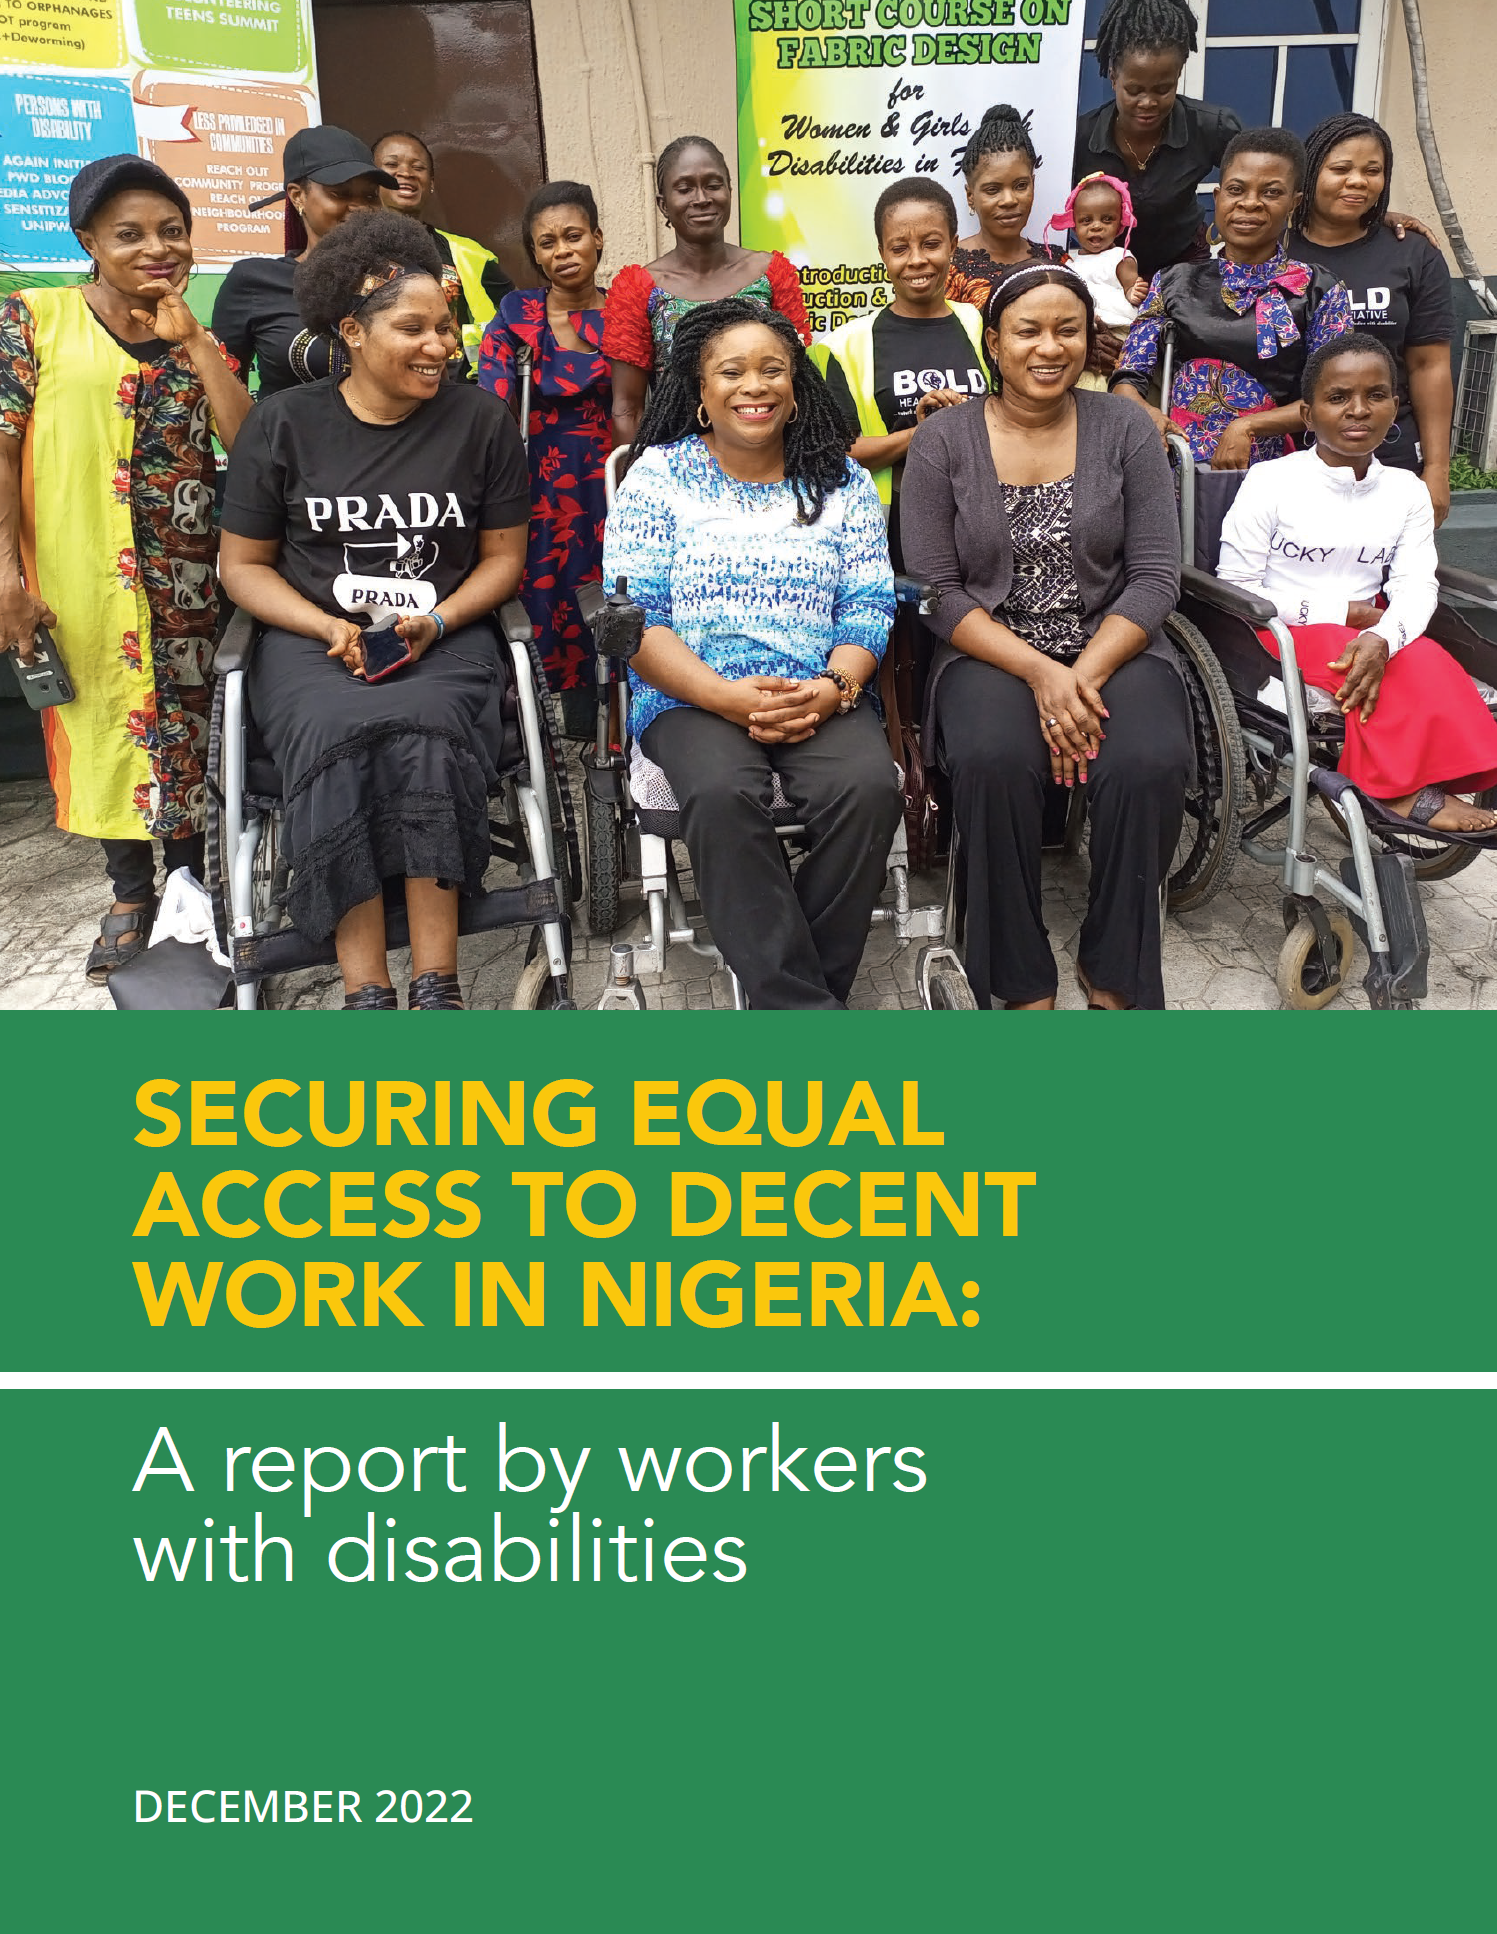 Securing Equal Access to Decent Work in Nigeria: A Report by Workers with Disabilities